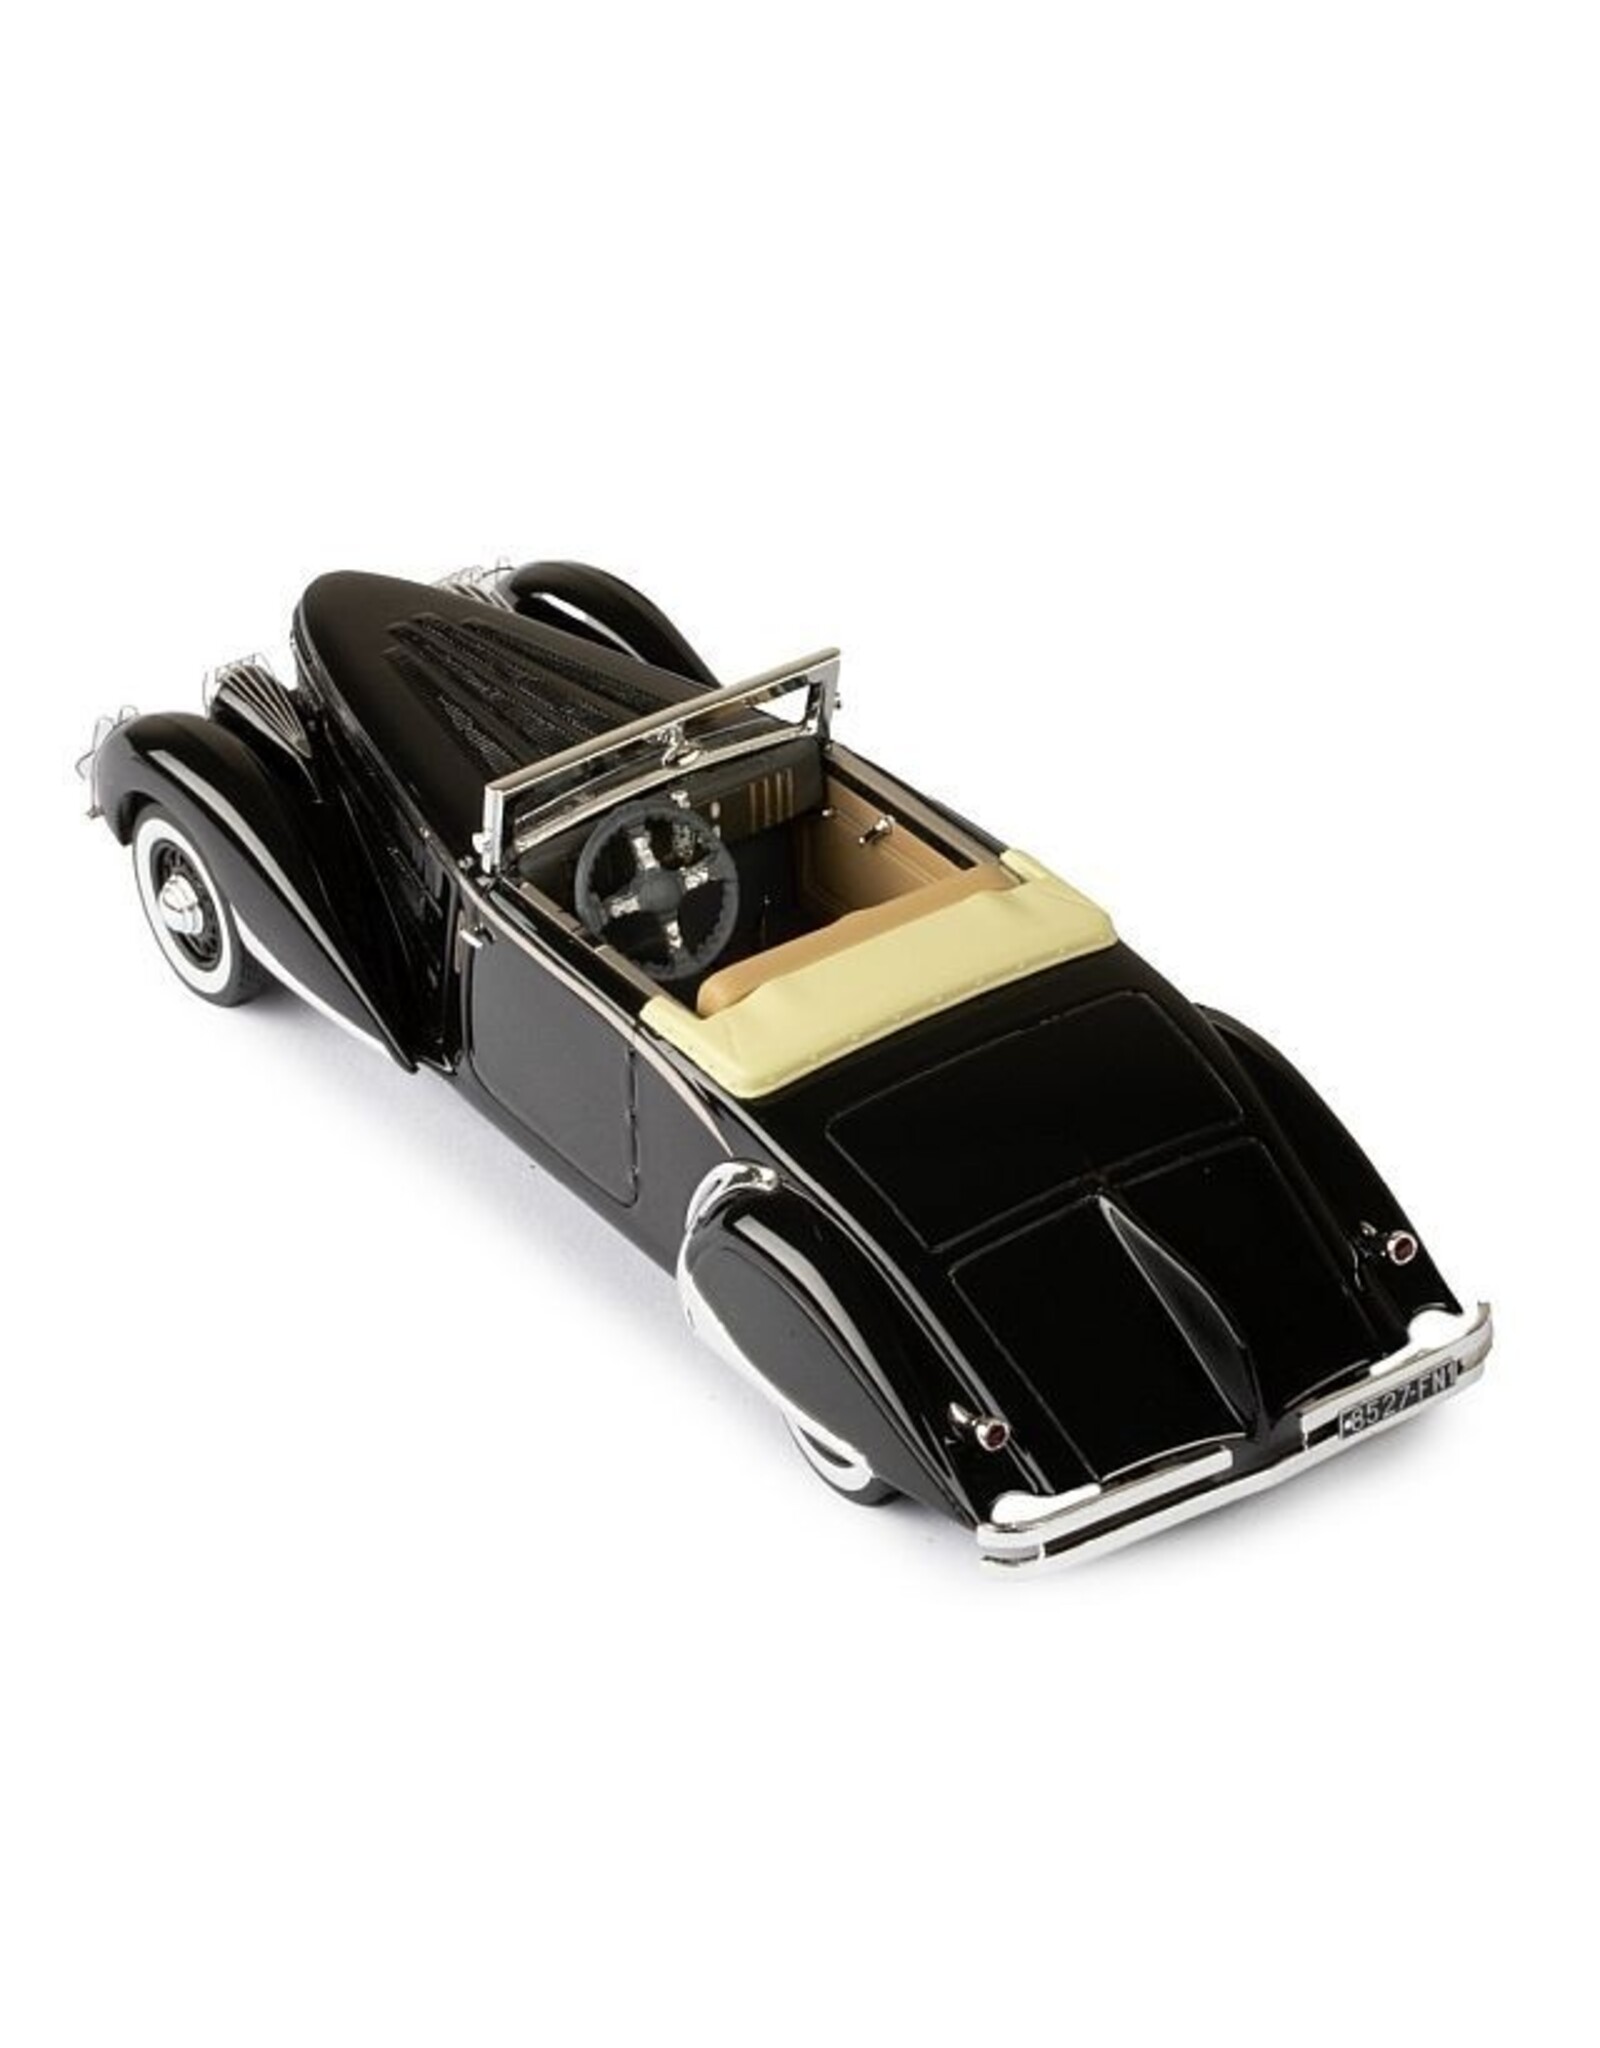 Delage by Chapron Delage D-8-85 Clabot by Henri Chapron(1935)open roof(with back bumper)black